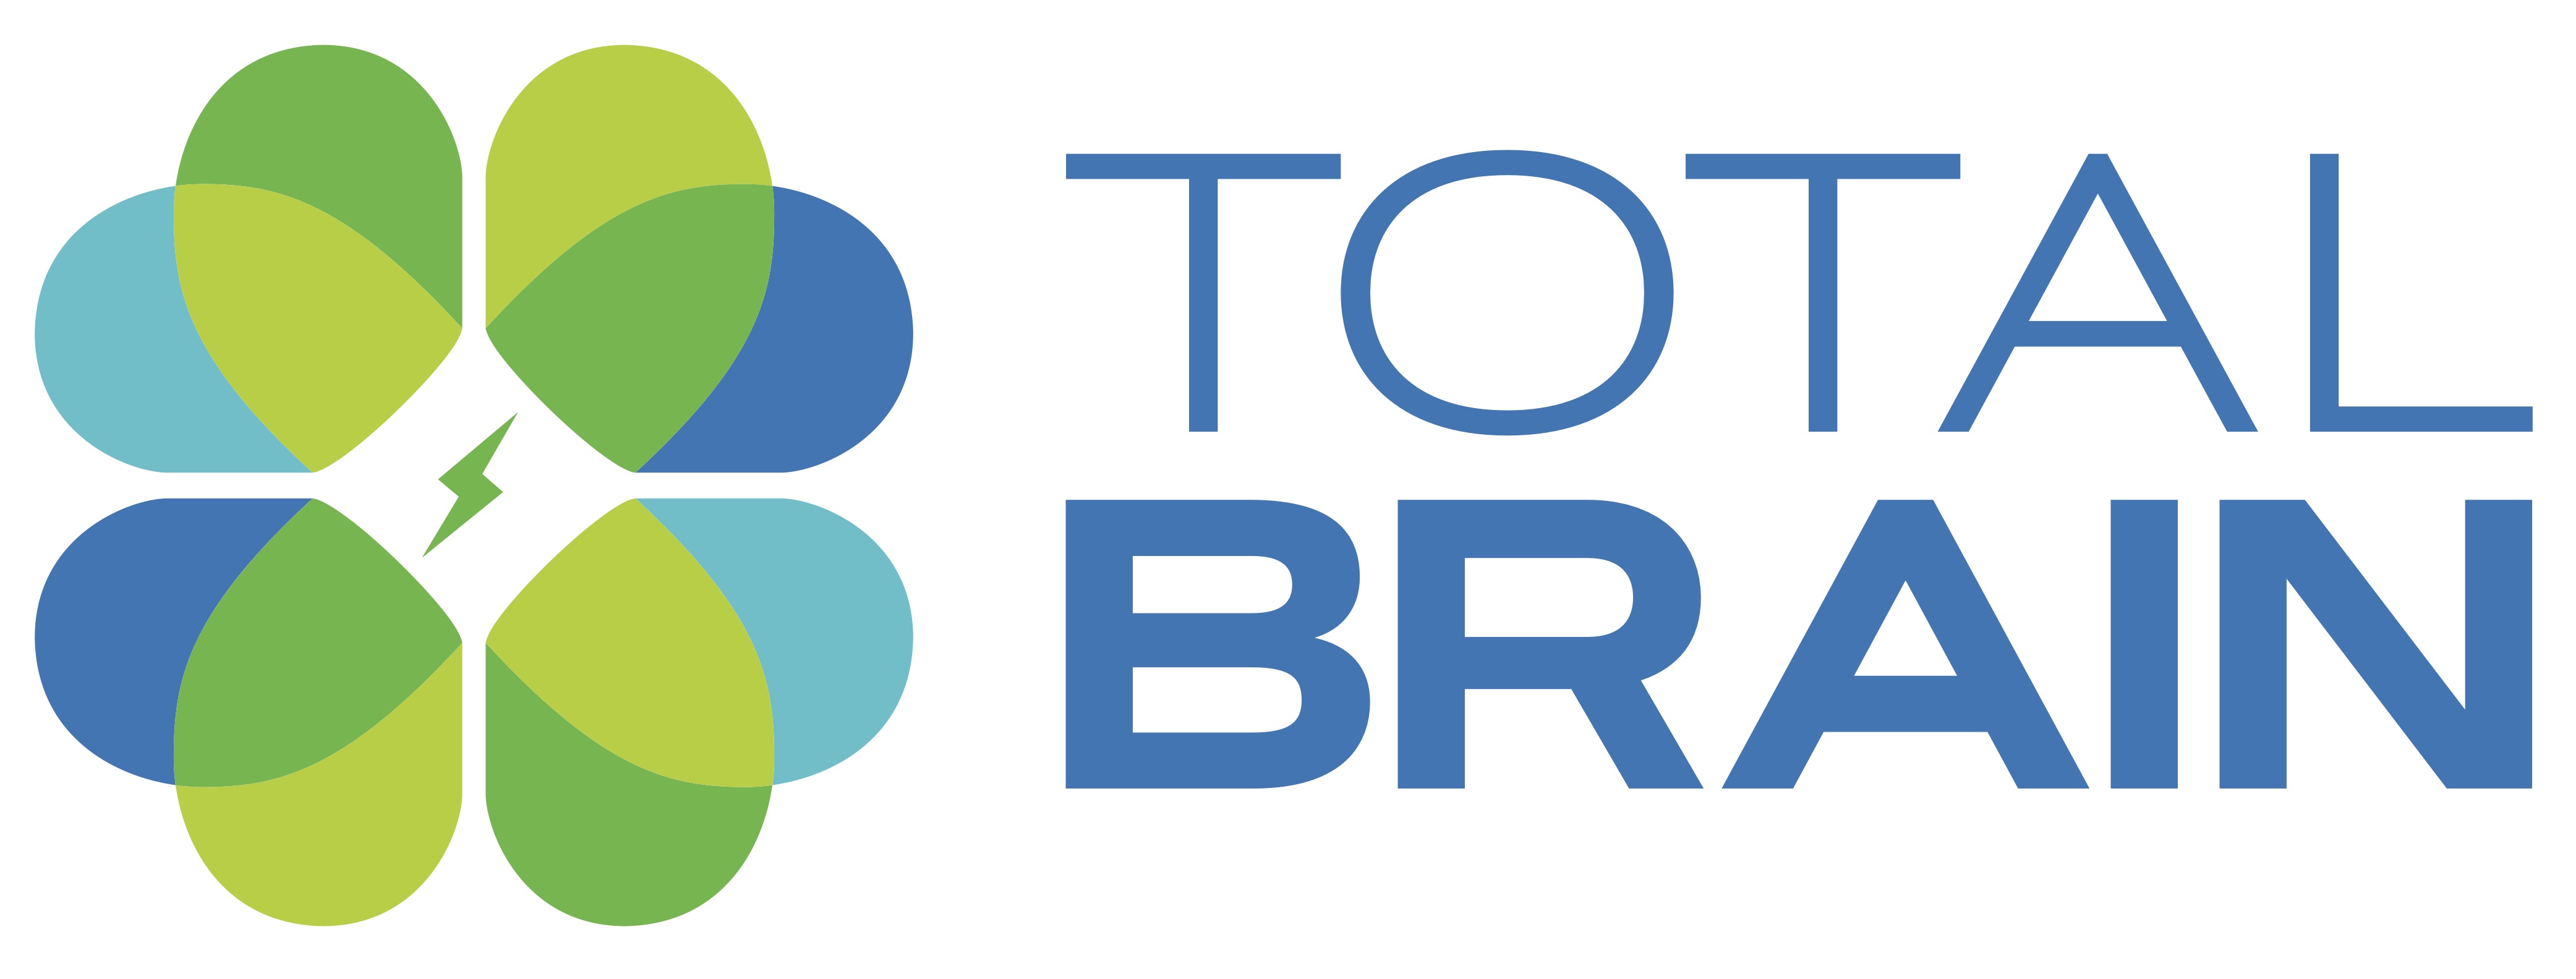 Total Brain sponsorship from Emotional Well Being 